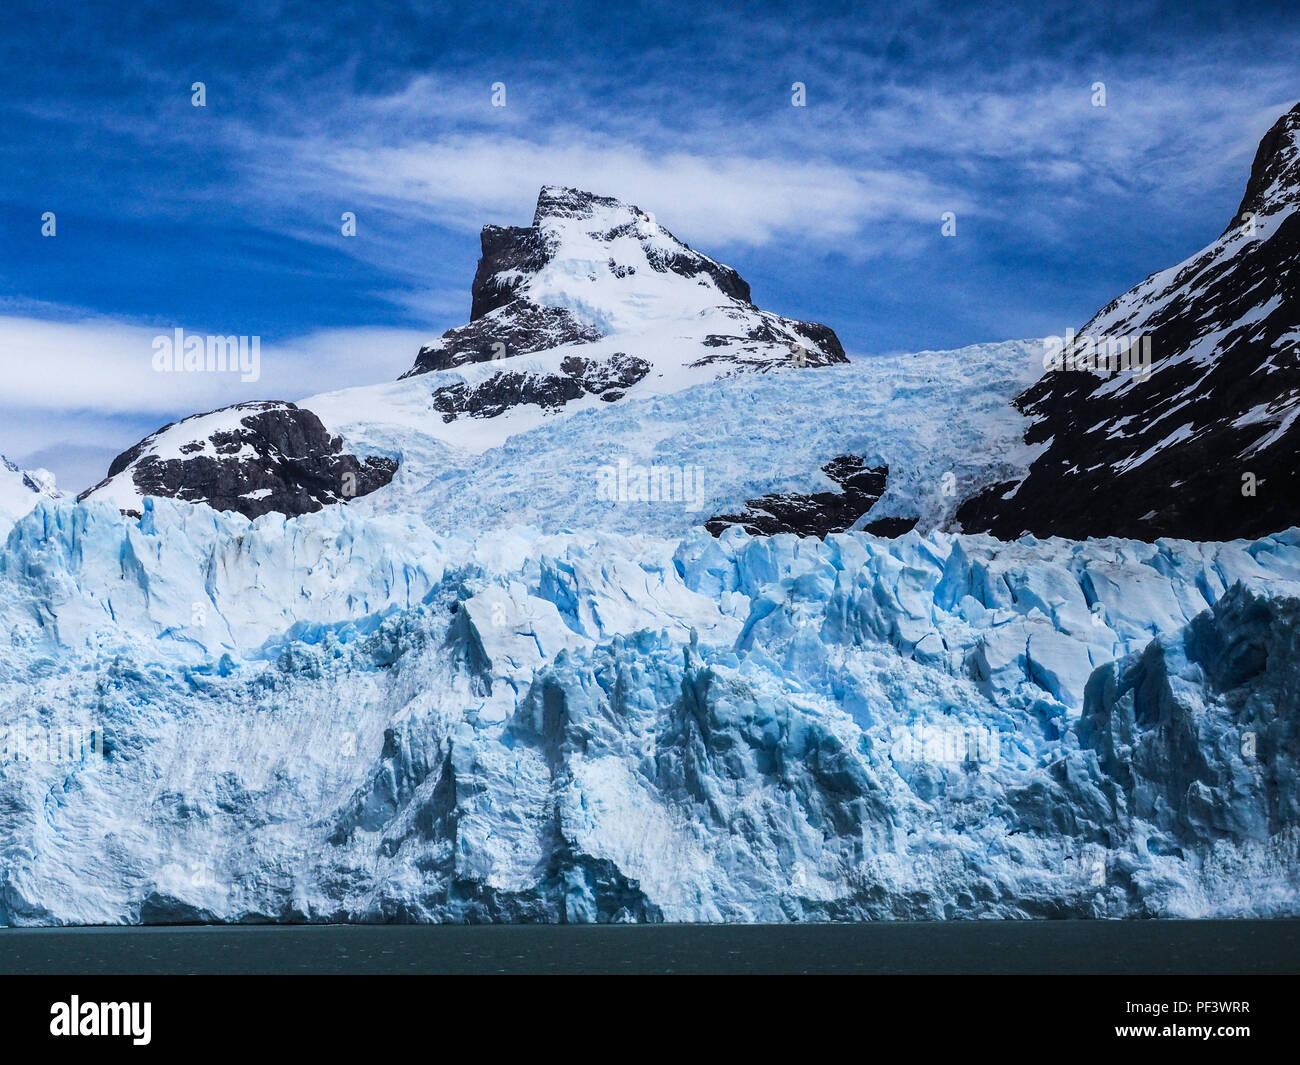 The Upsala Glacier is a large valley glacier on the eastern side of the Southern Patagonian Ice Field. Stock Photo